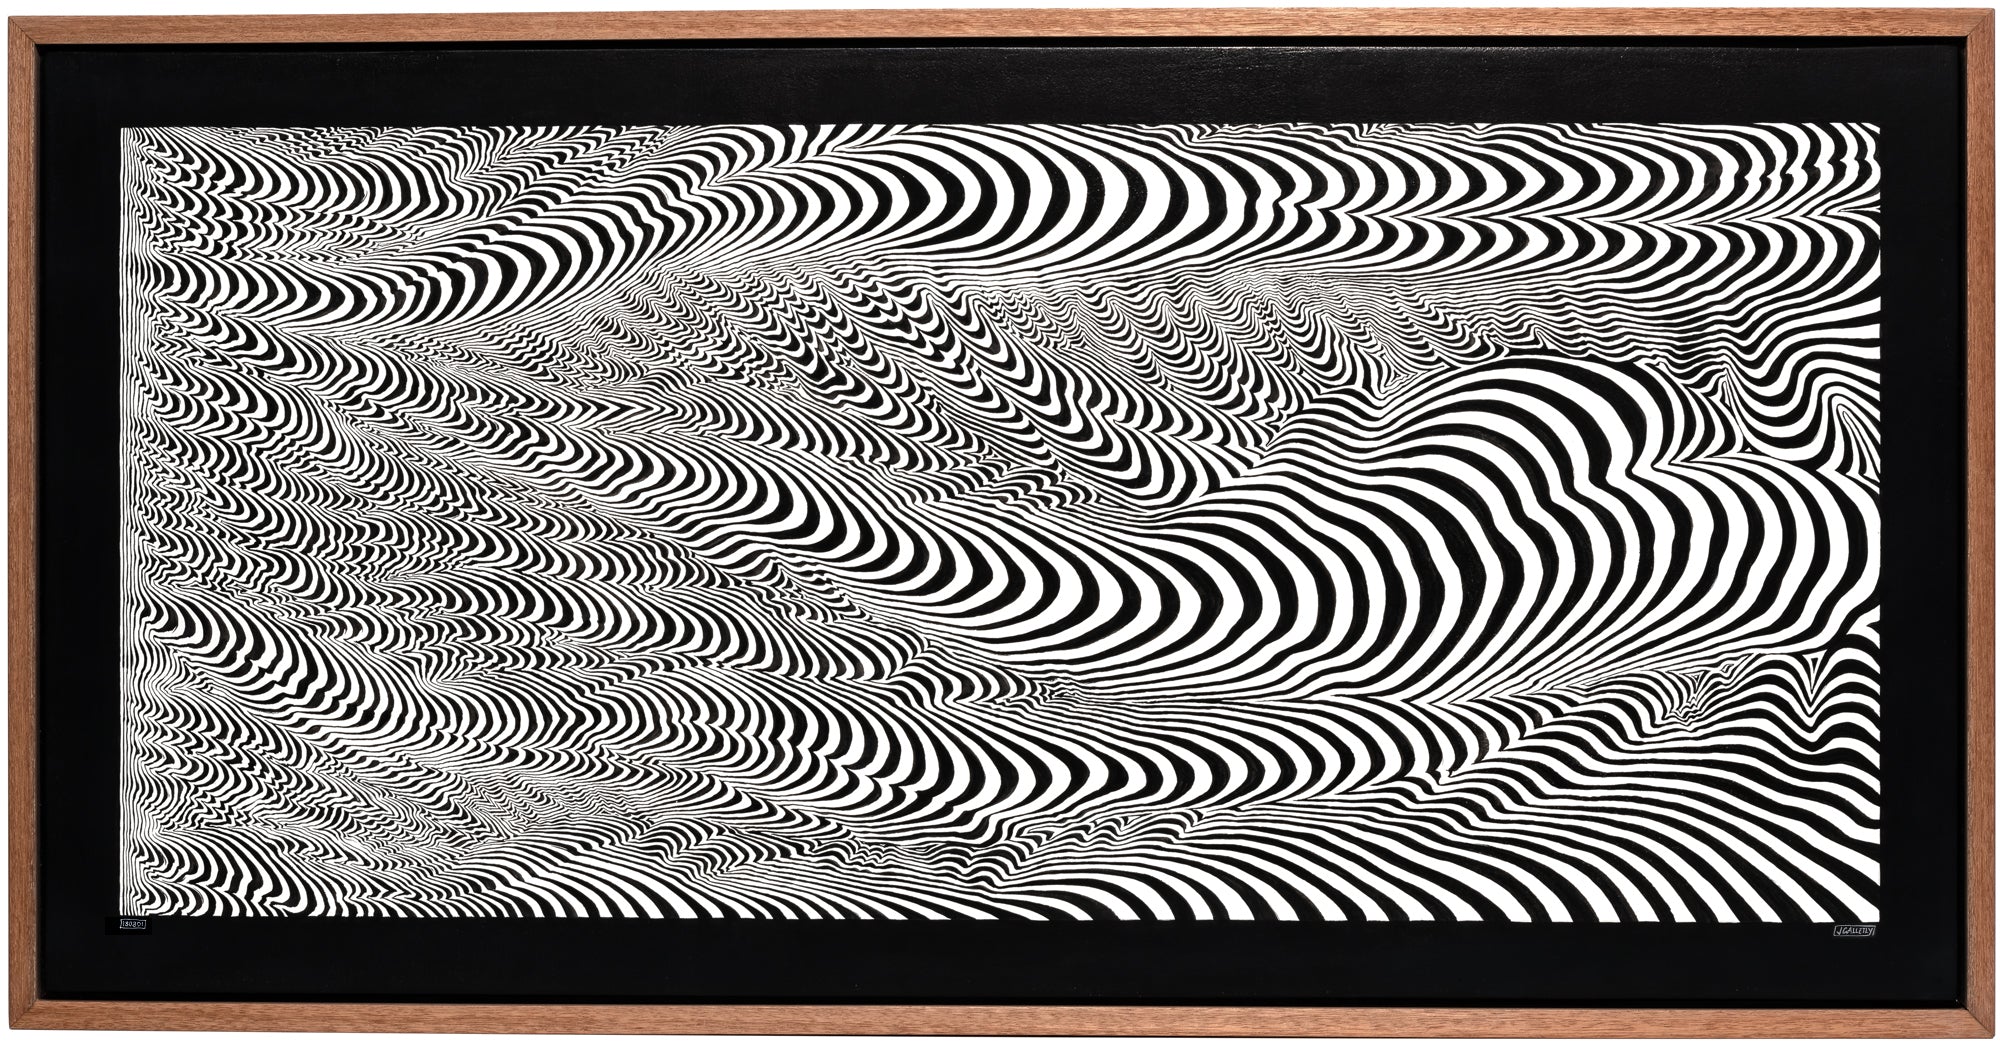 Josh Galletly Art, contemporary black and white line paintings, optical illuson psychedelic energy fields